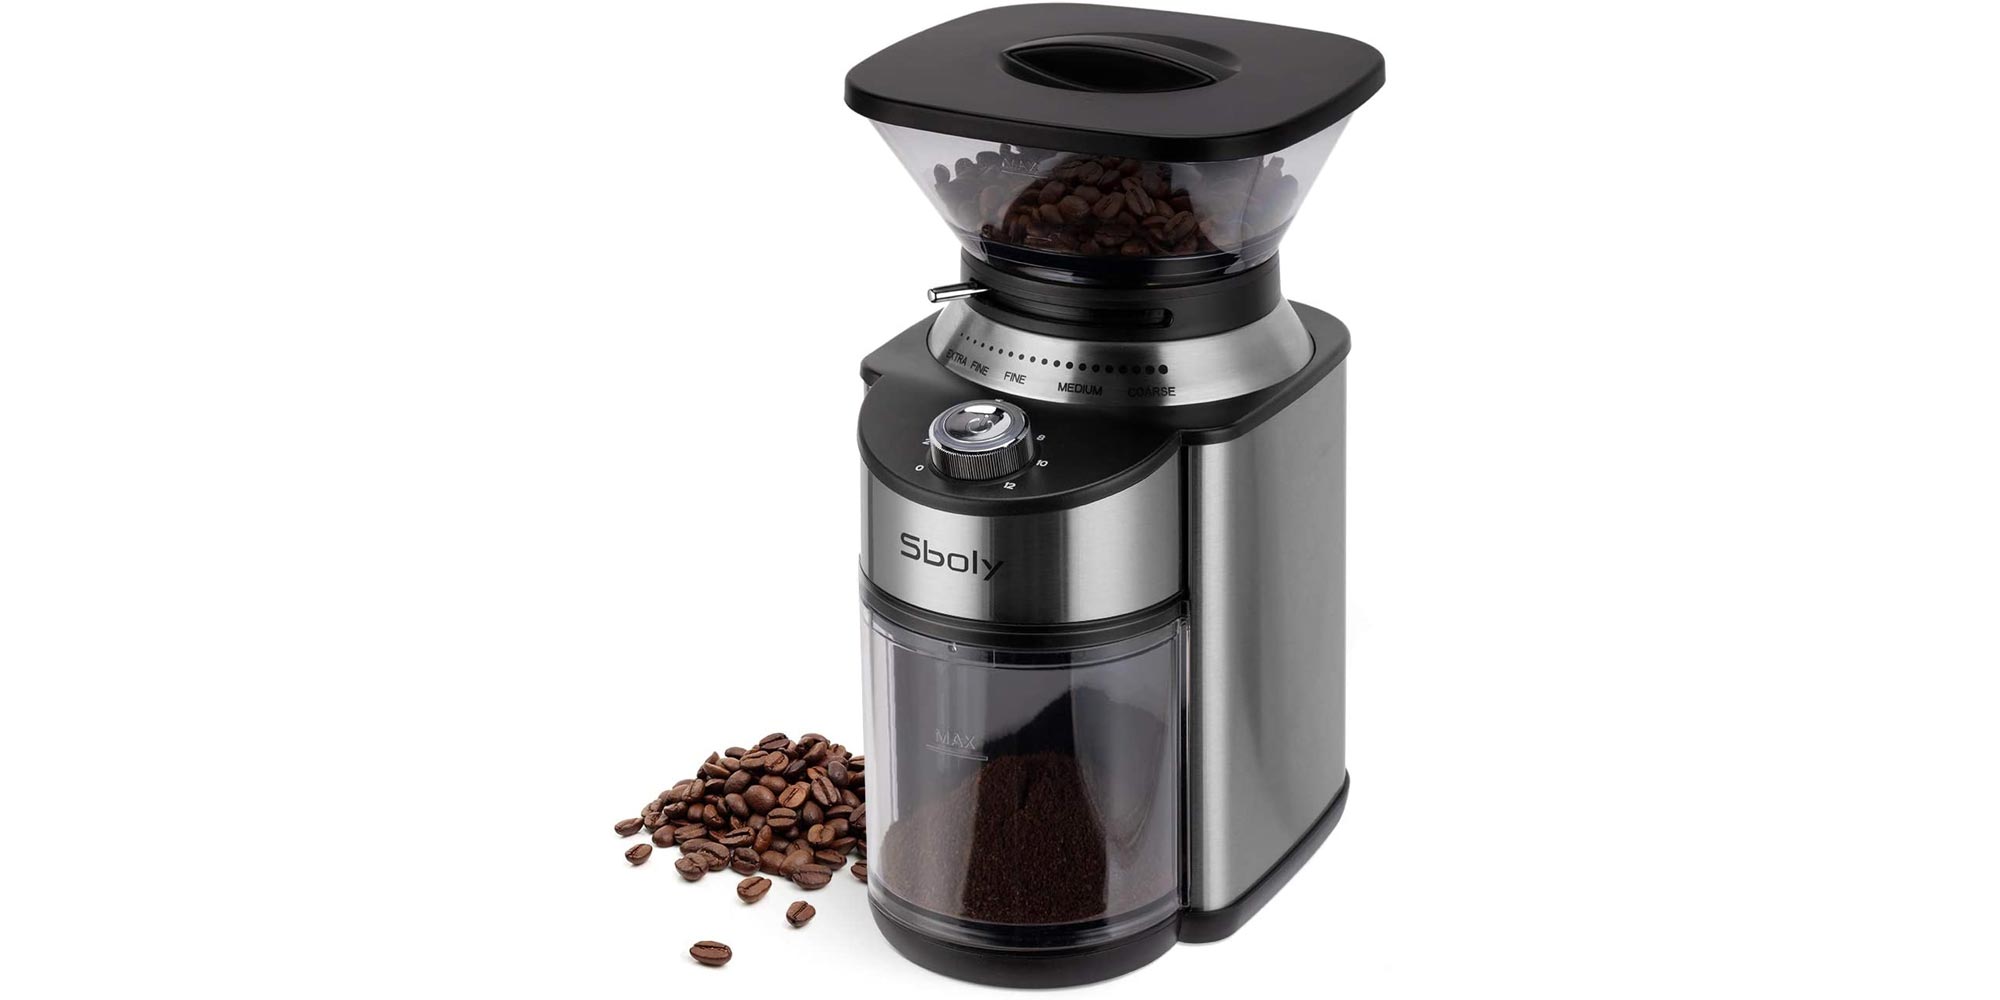 Highly-rated Sboly conical burr grinder upgrades your coffee setup at a low  of $39.50